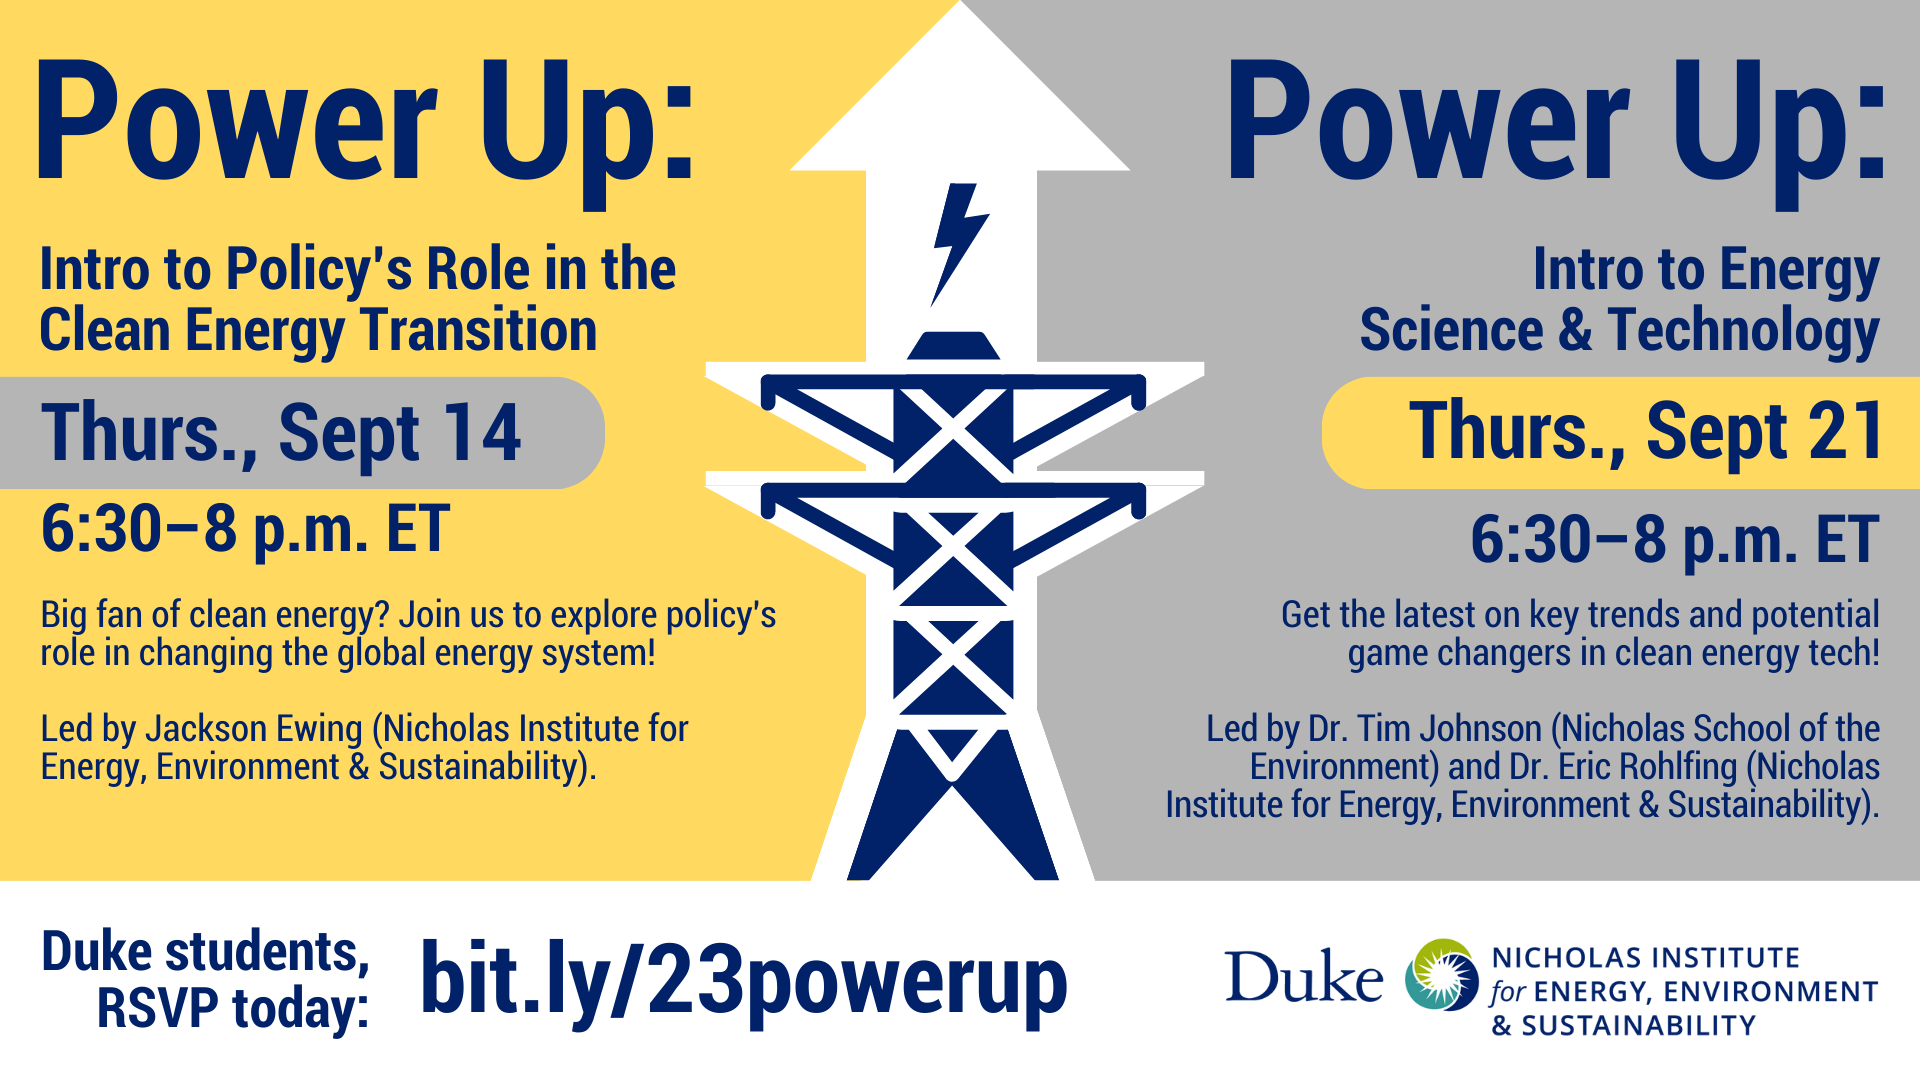 Power Up: Intro to Policy’s Role in the Clean Energy Transition